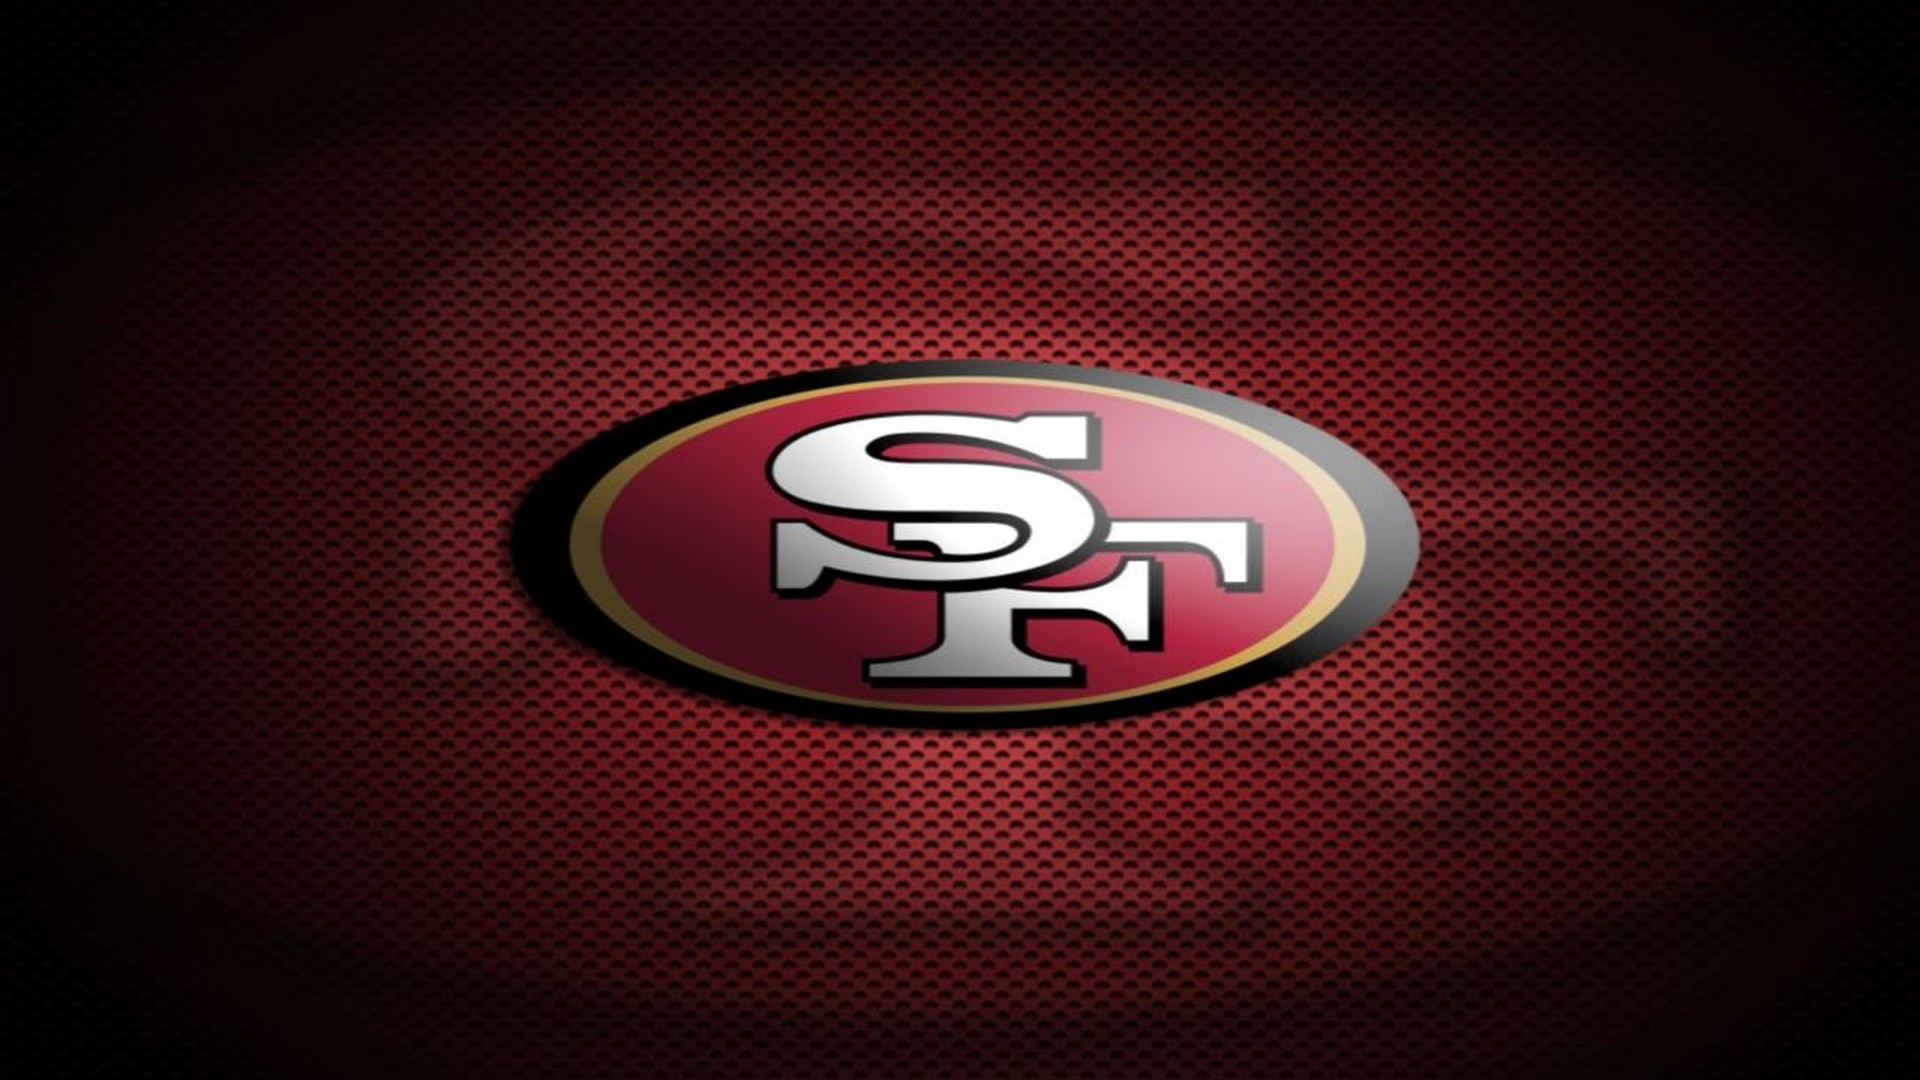 San Francisco 49ers Desktop Wallpapers With high-resolution 1920X1080 pixel. You can use this wallpaper for your Mac or Windows Desktop Background, iPhone, Android or Tablet and another Smartphone device